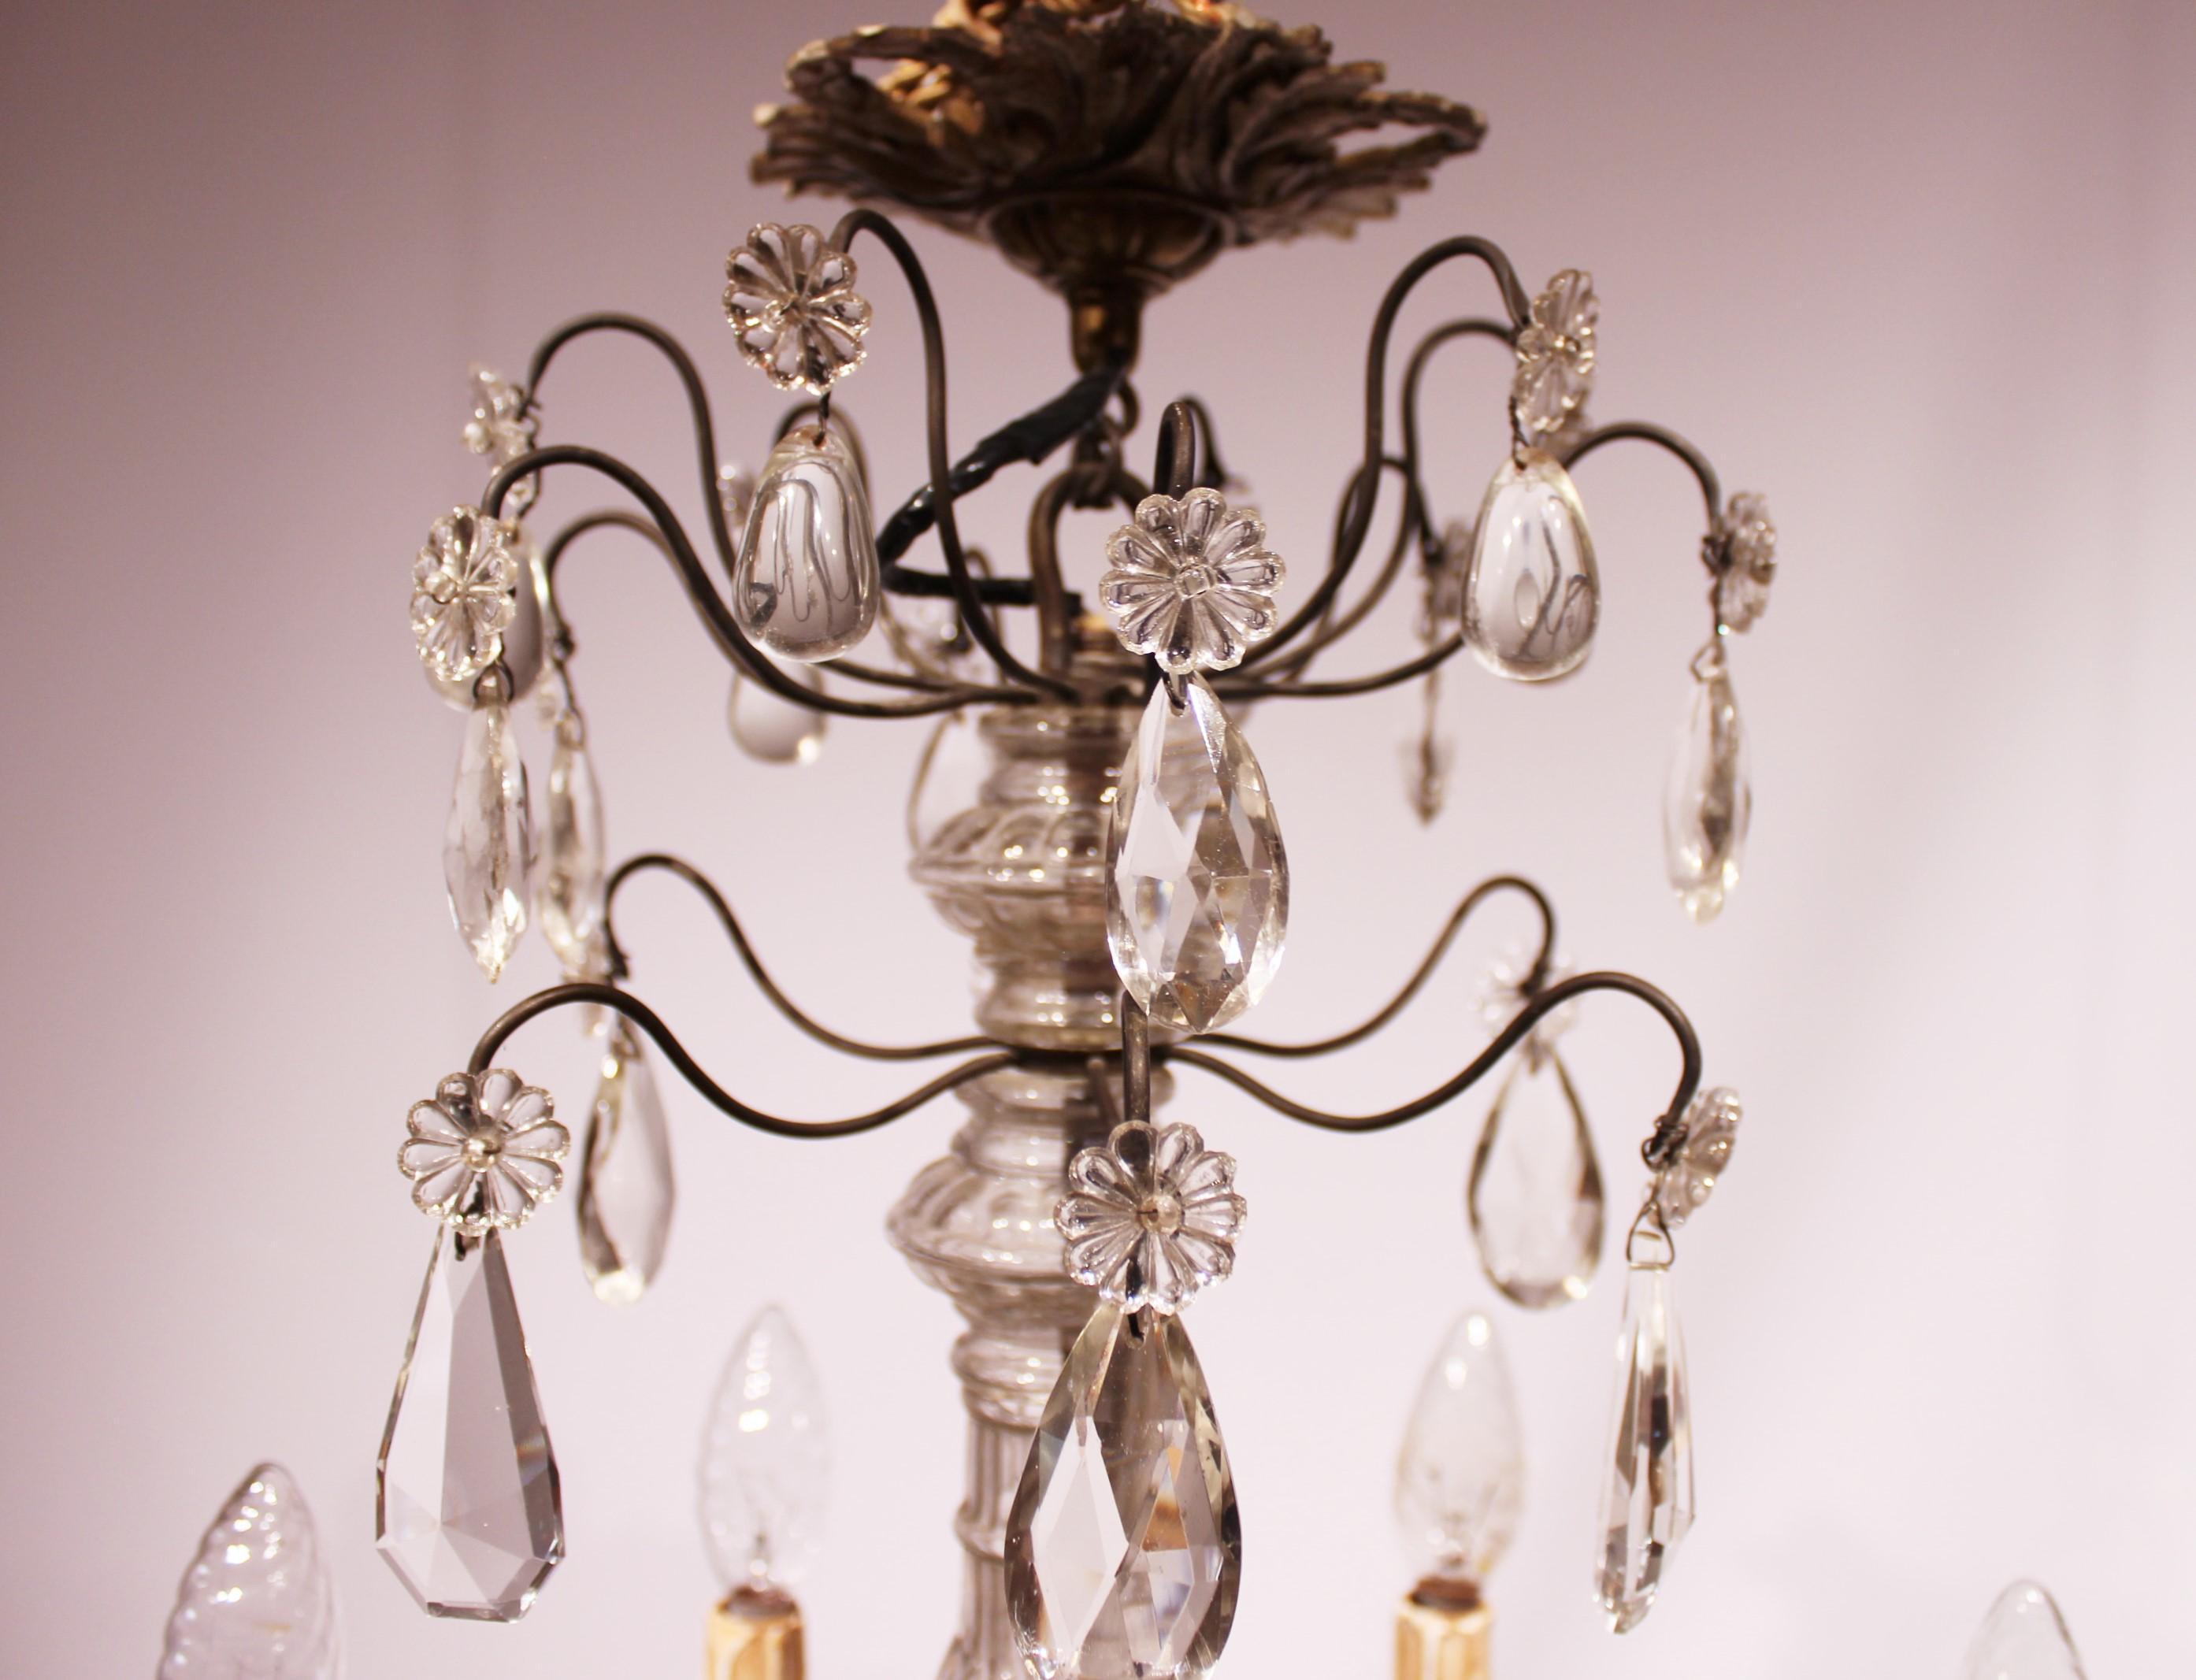 Other Chandelier of Brass and Polished Prisms from France, circa 1920s